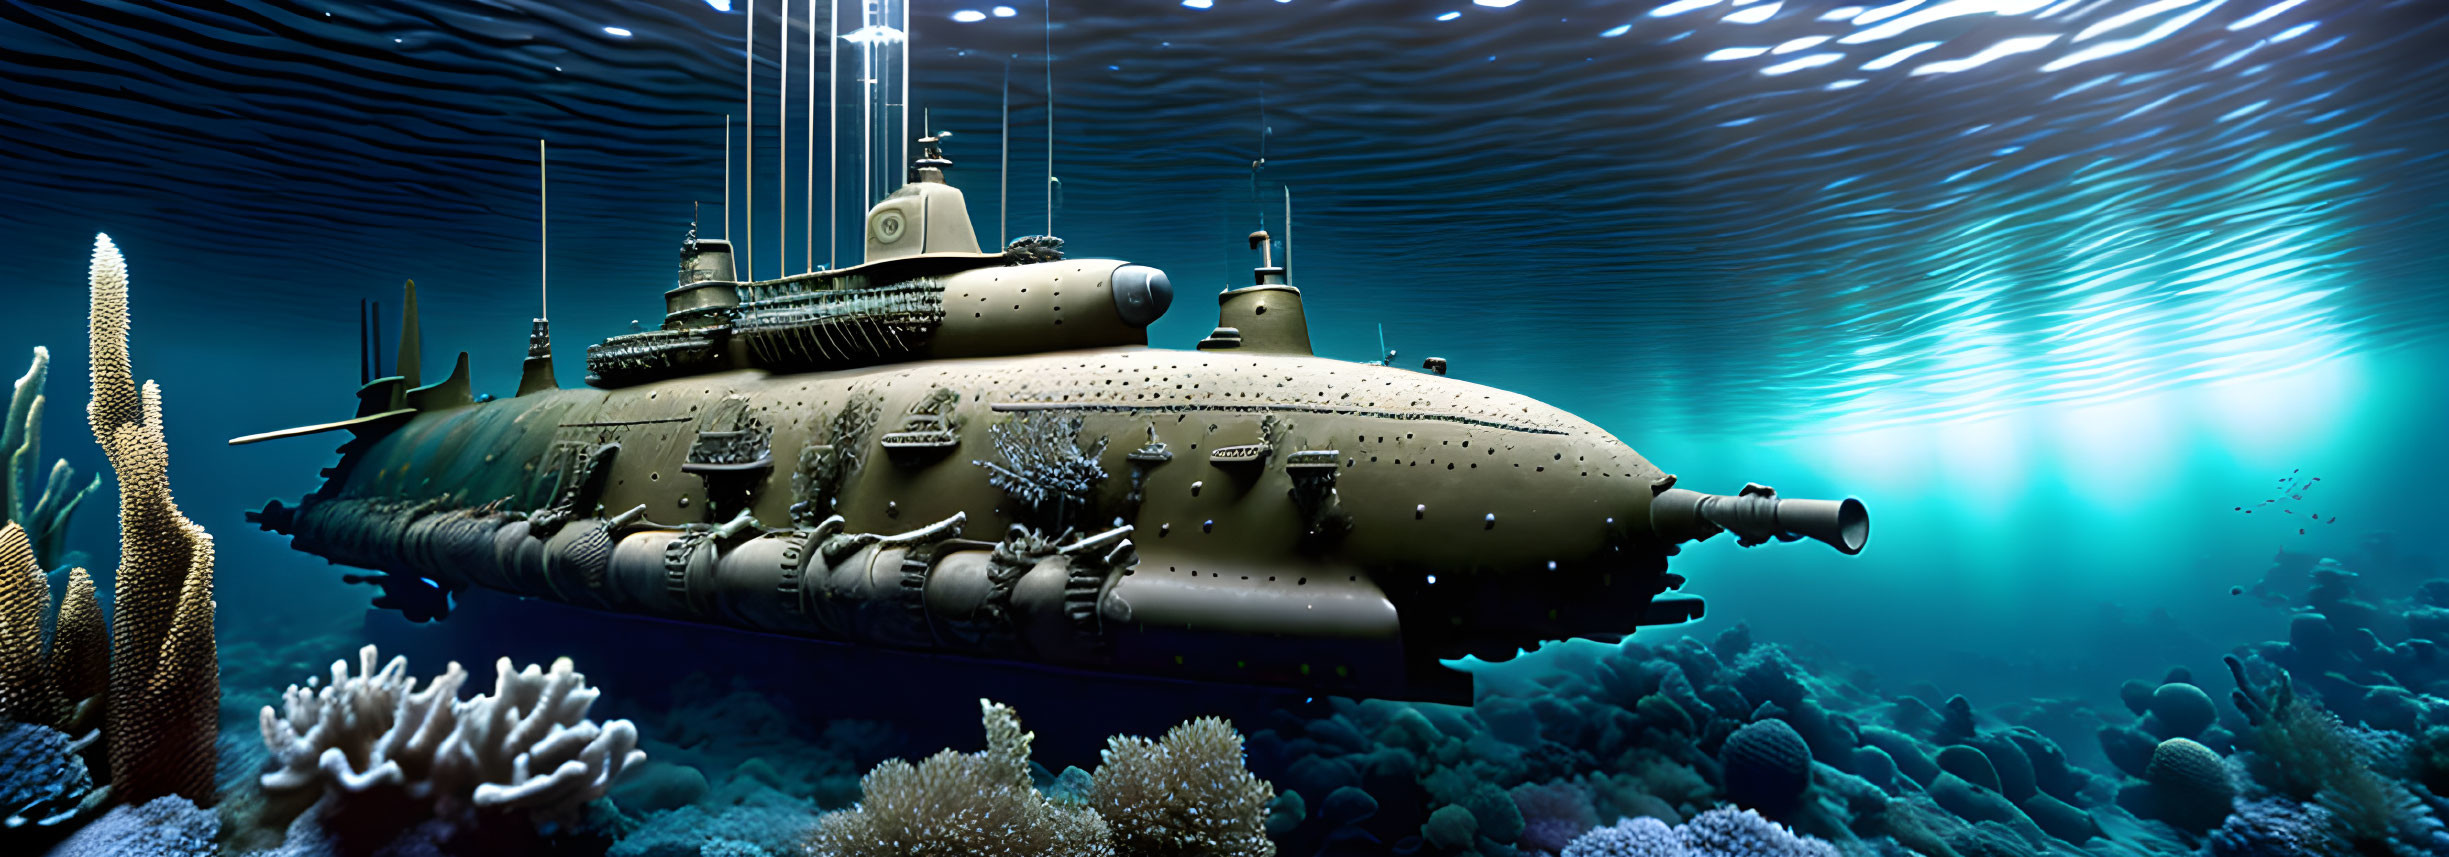 Futuristic submarine exploring ocean depths with coral and light beams